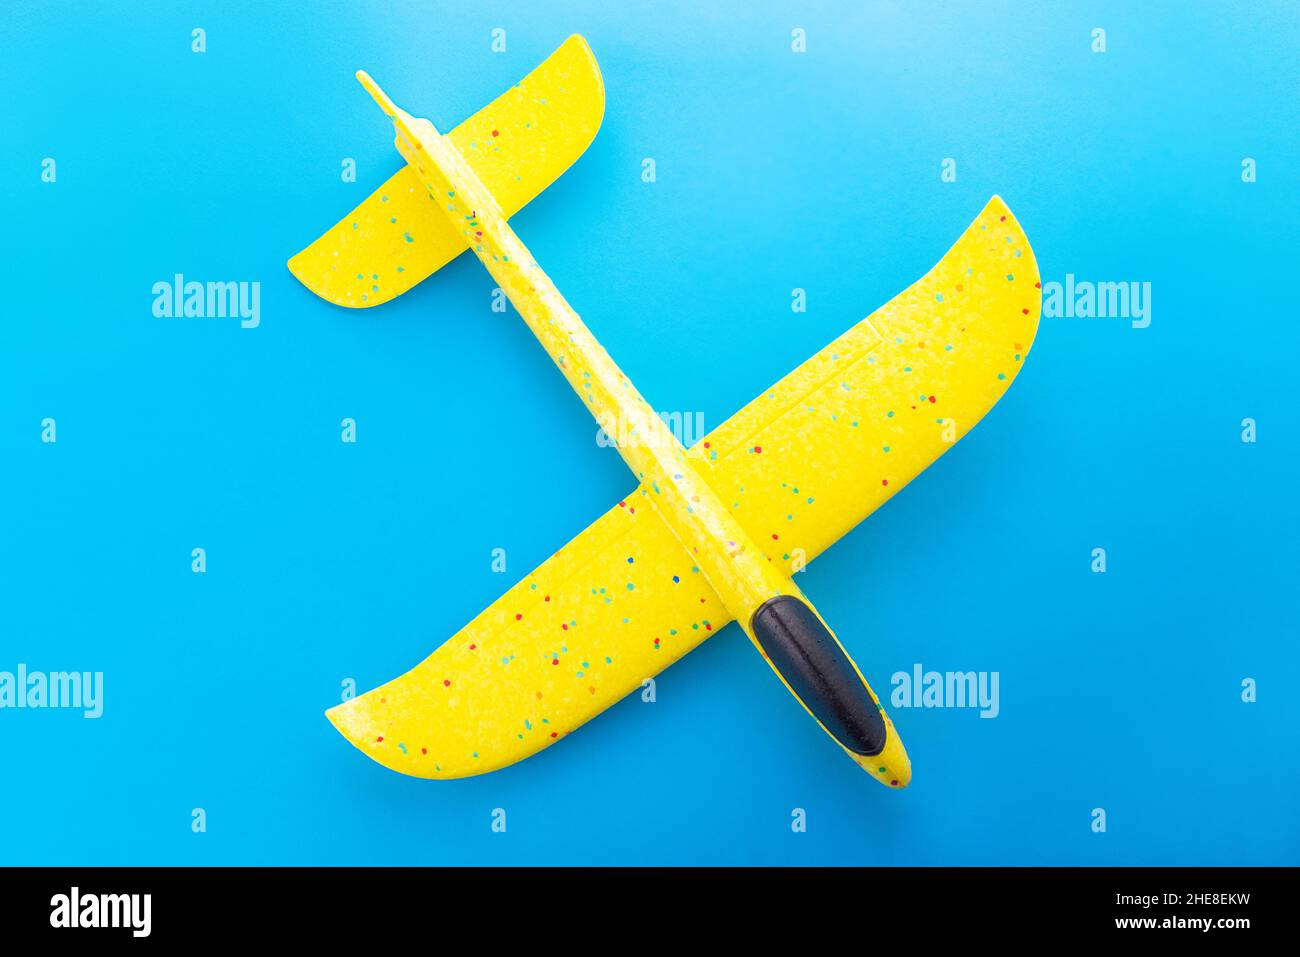 Yellow airplane toy isolated on blue background Stock Photo